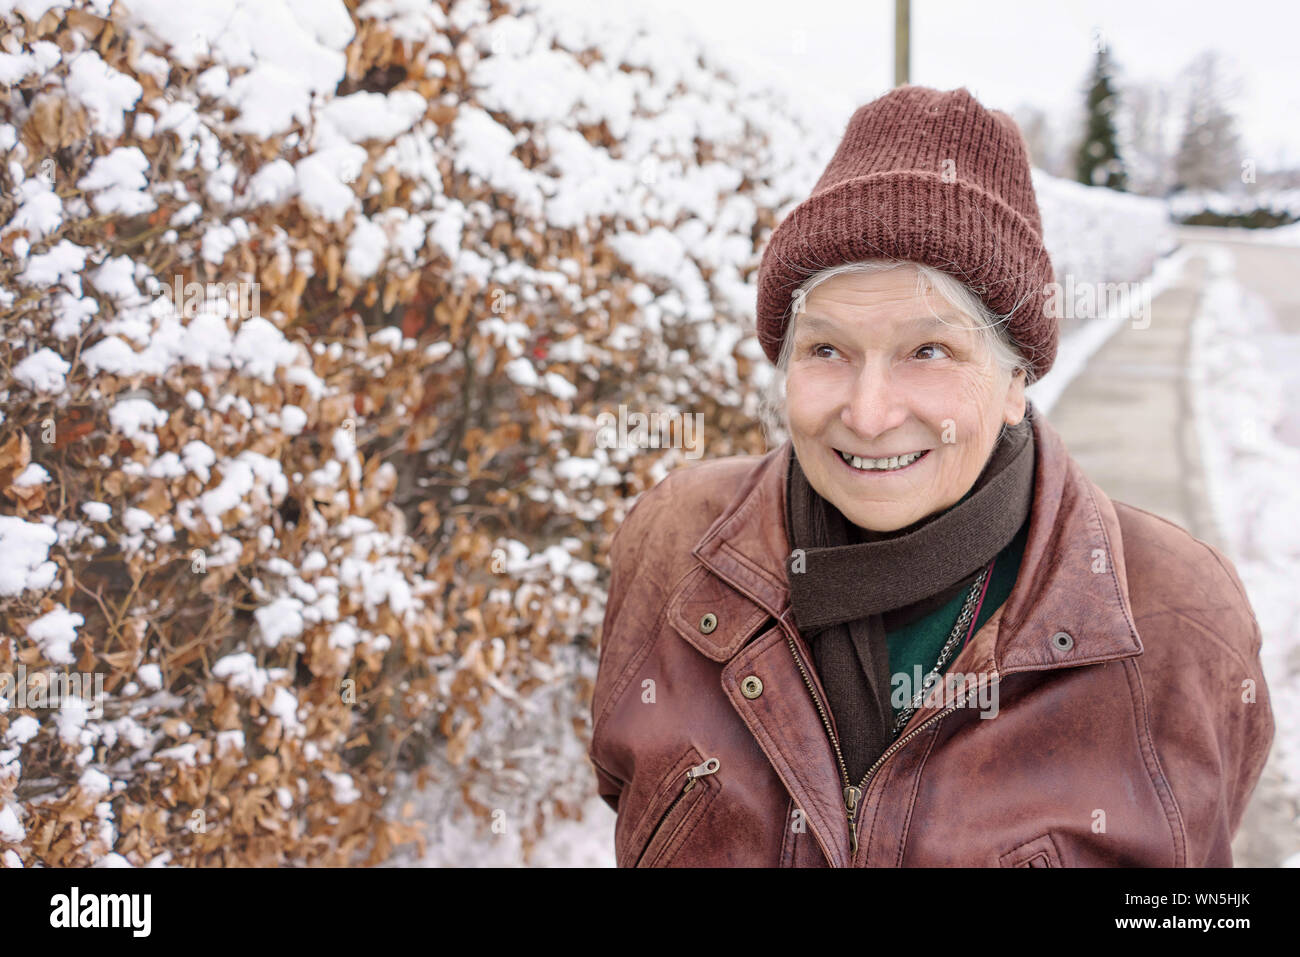 Smiling Woman Looking Away In Snow Stock Photo